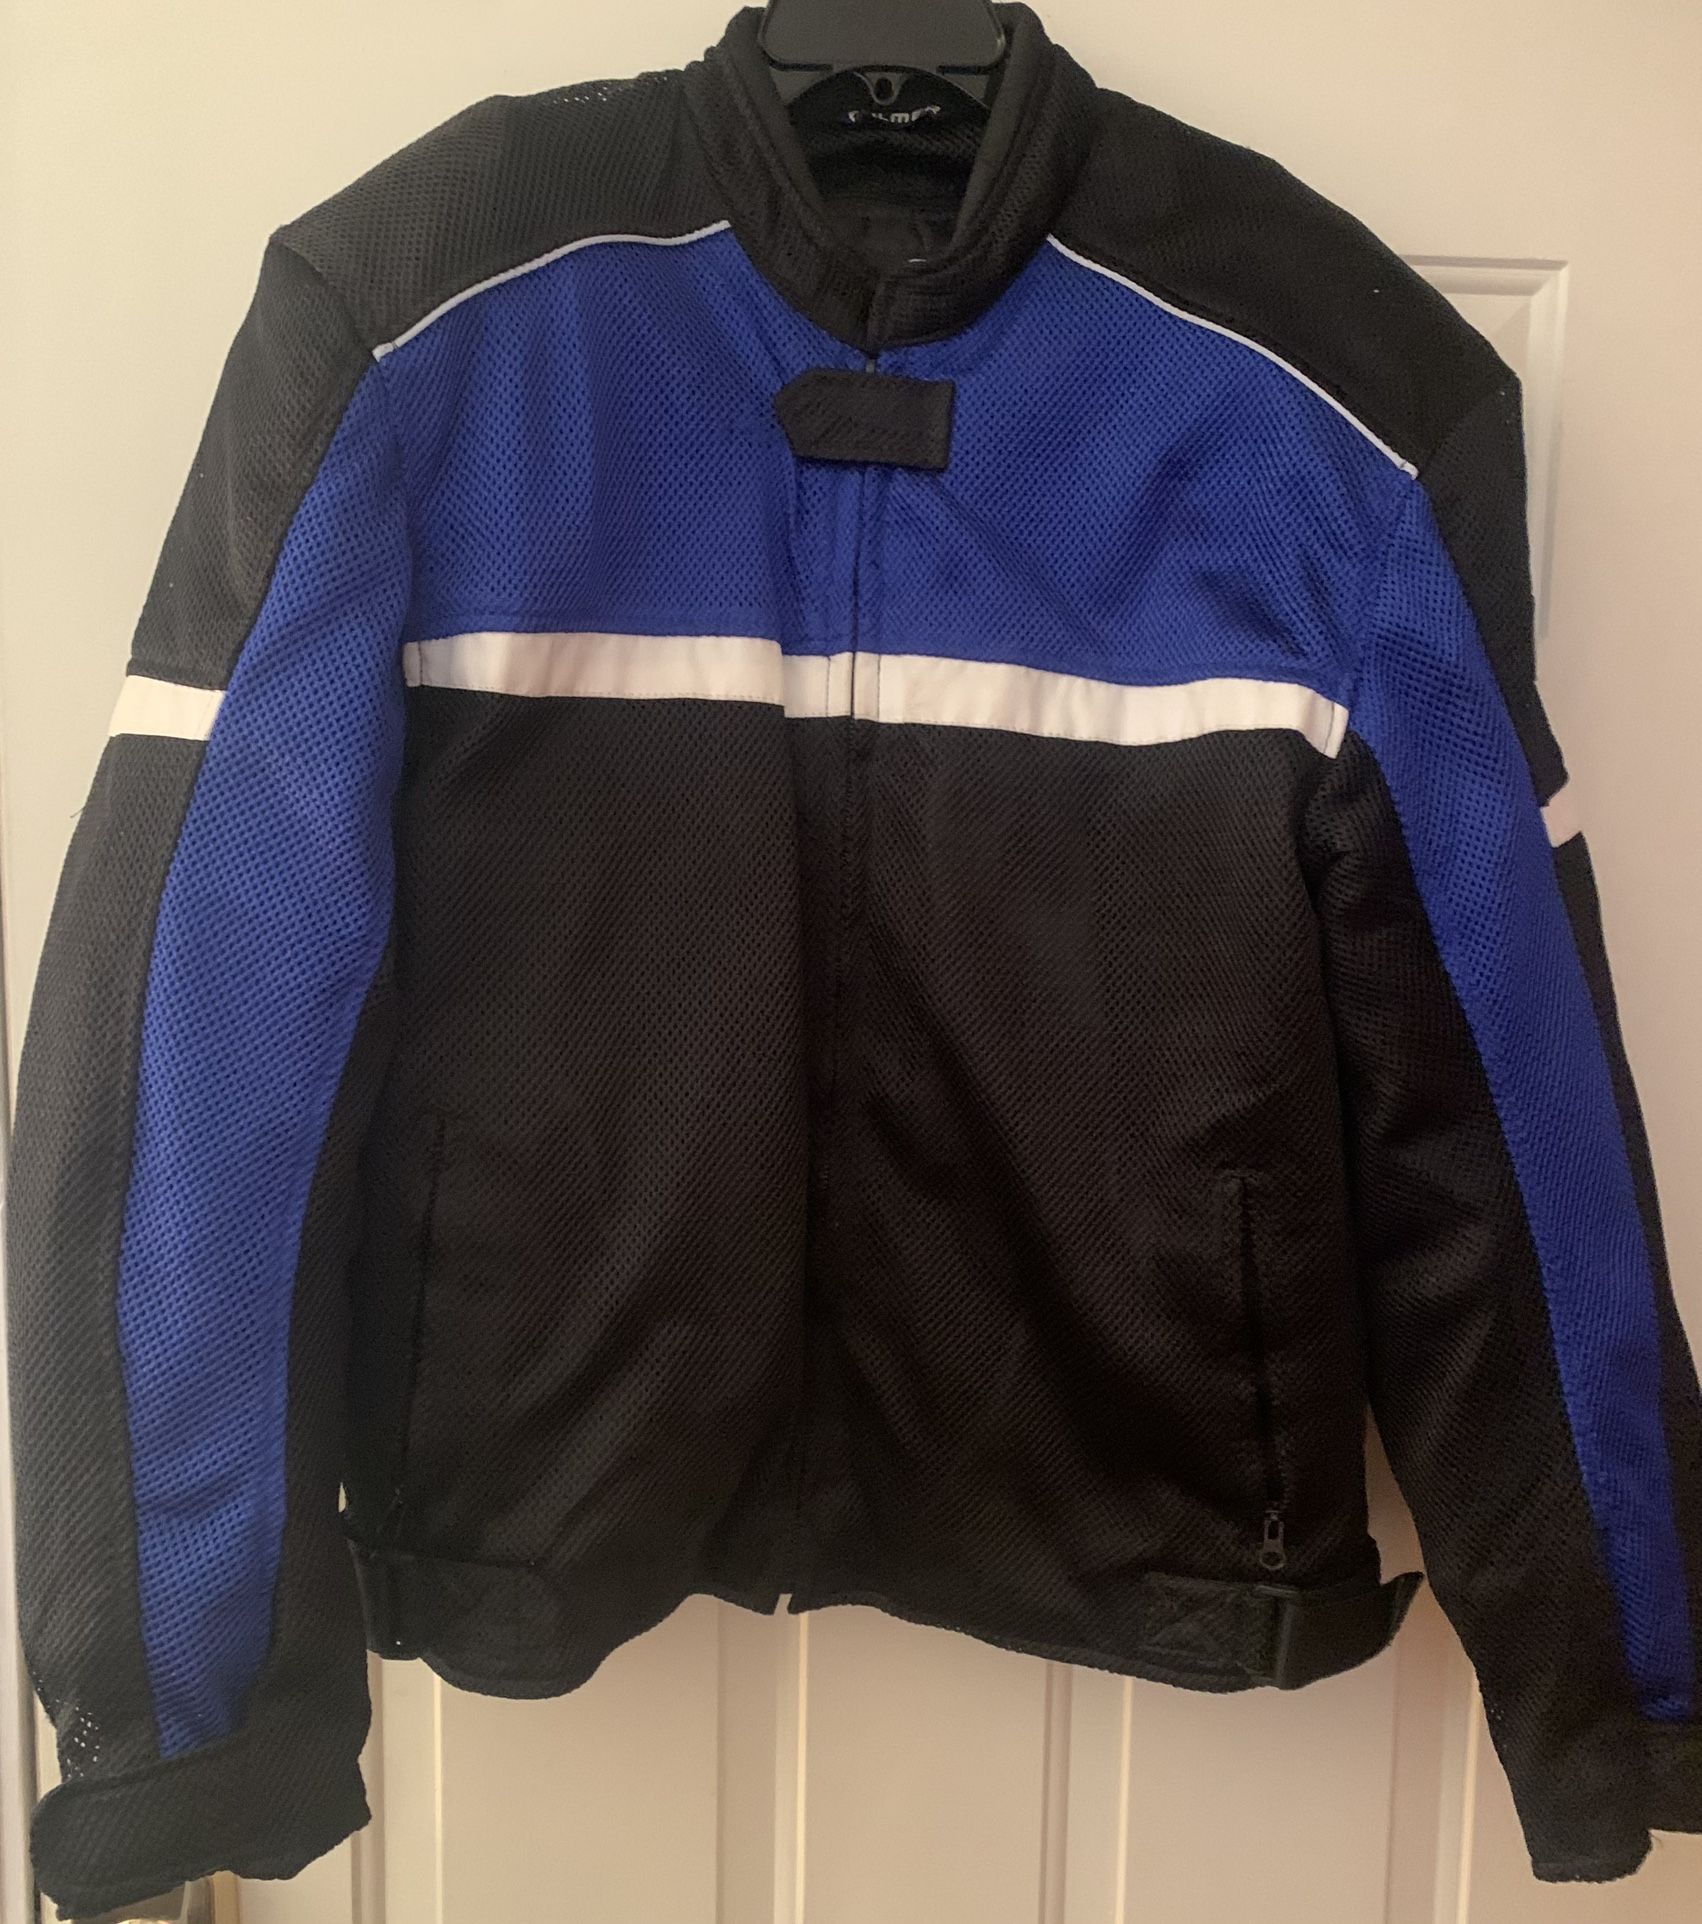 Blue And Black Riding Jacket 